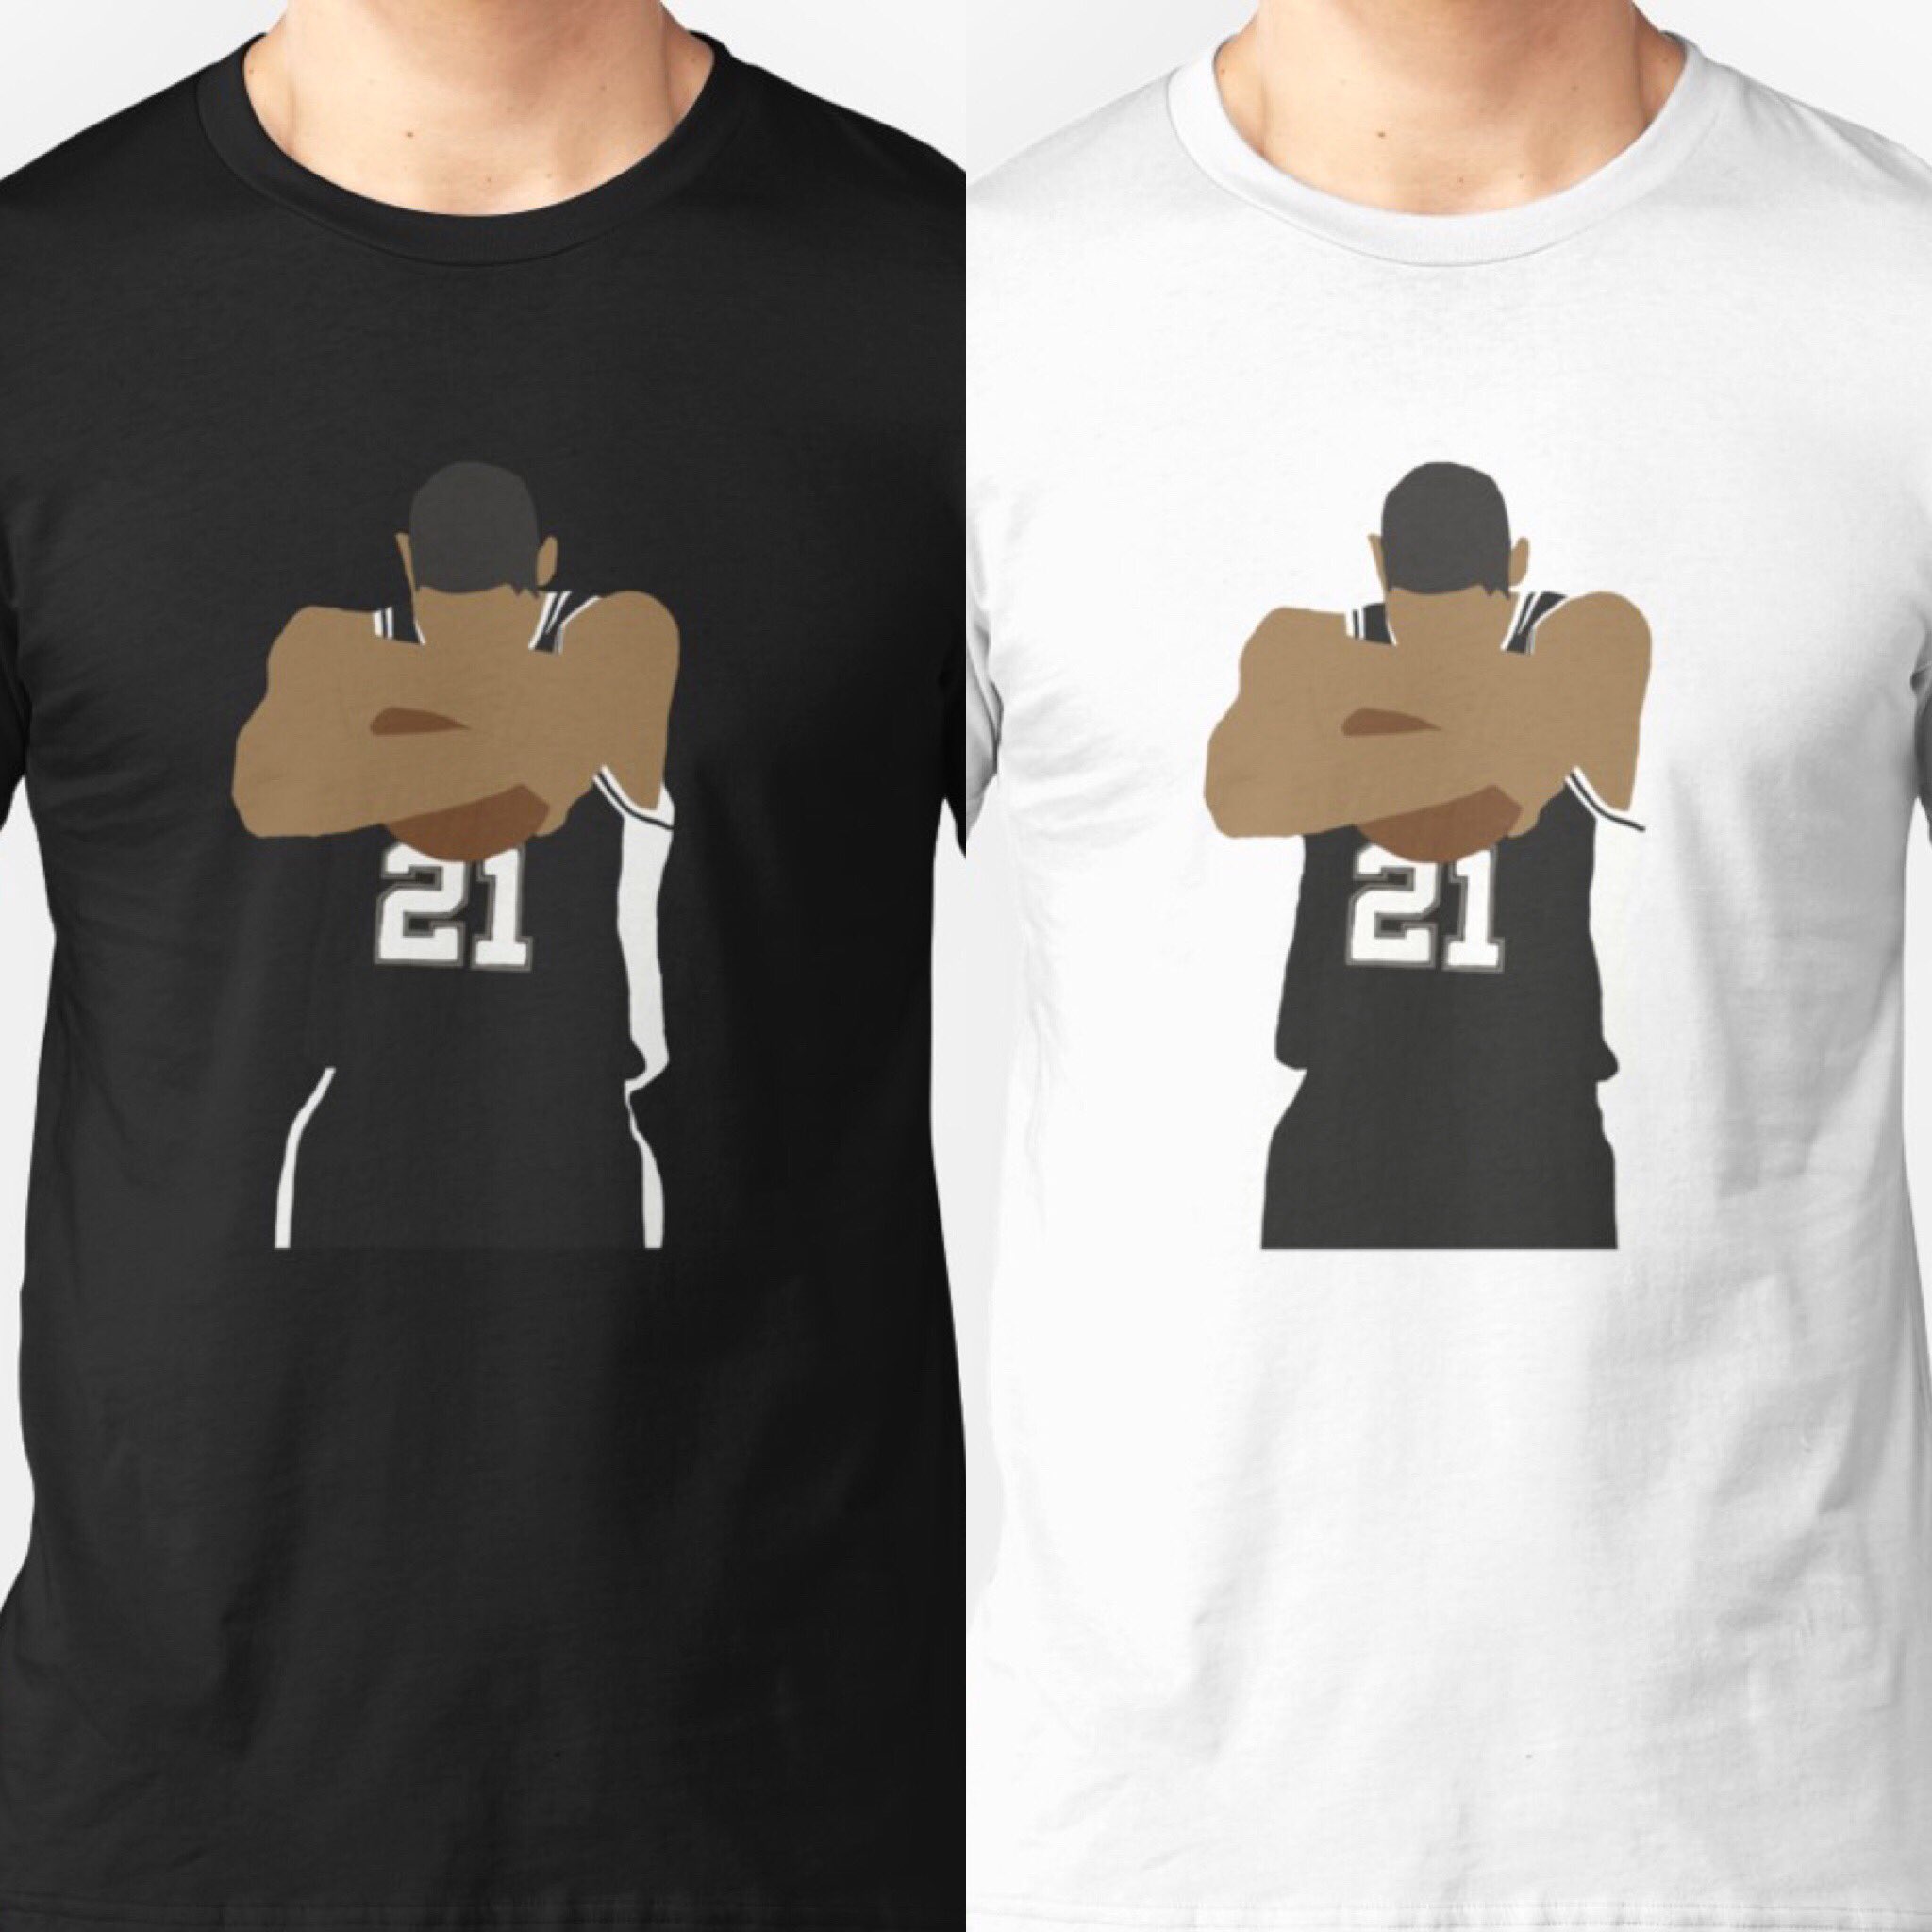 Happy Birthday to Tim Duncan! Link to this design is in our bio and down below    